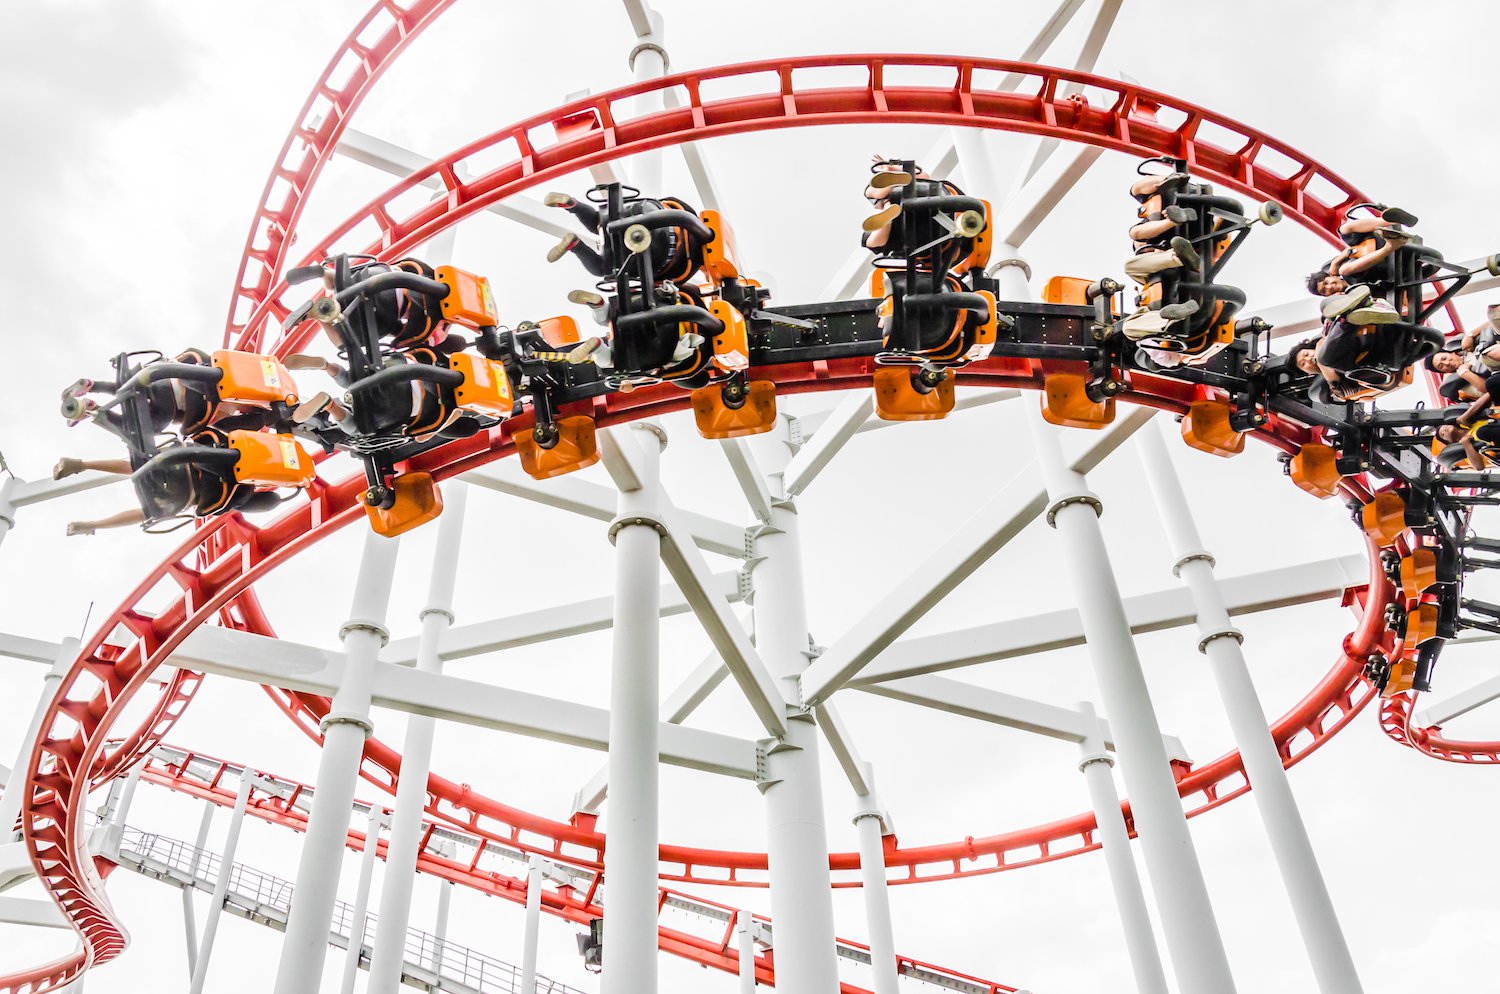 Bitcoin’s Price Swings To Nearly $6,500 In Volatile Trading Hour